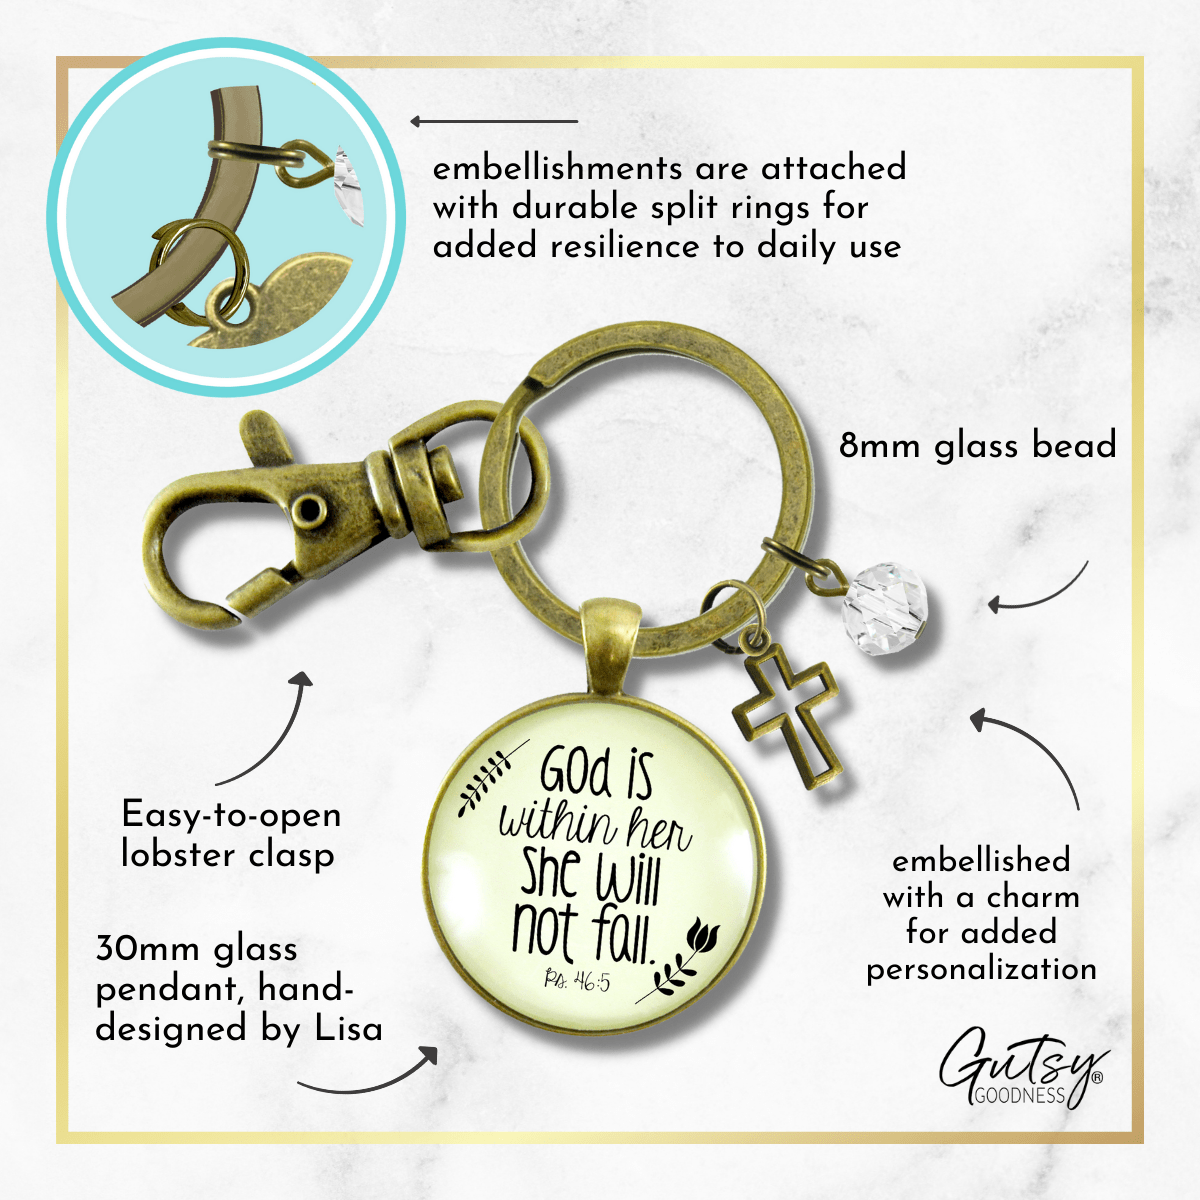 God is Within Her Charm Keychain She Will Not Fall Woman of Faith Pendant Charm Gift - Gutsy Goodness;God Is Within Her Charm Keychain She Will Not Fall Woman Of Faith Pendant Charm Gift - Gutsy Goodness Handmade Jewelry Gifts